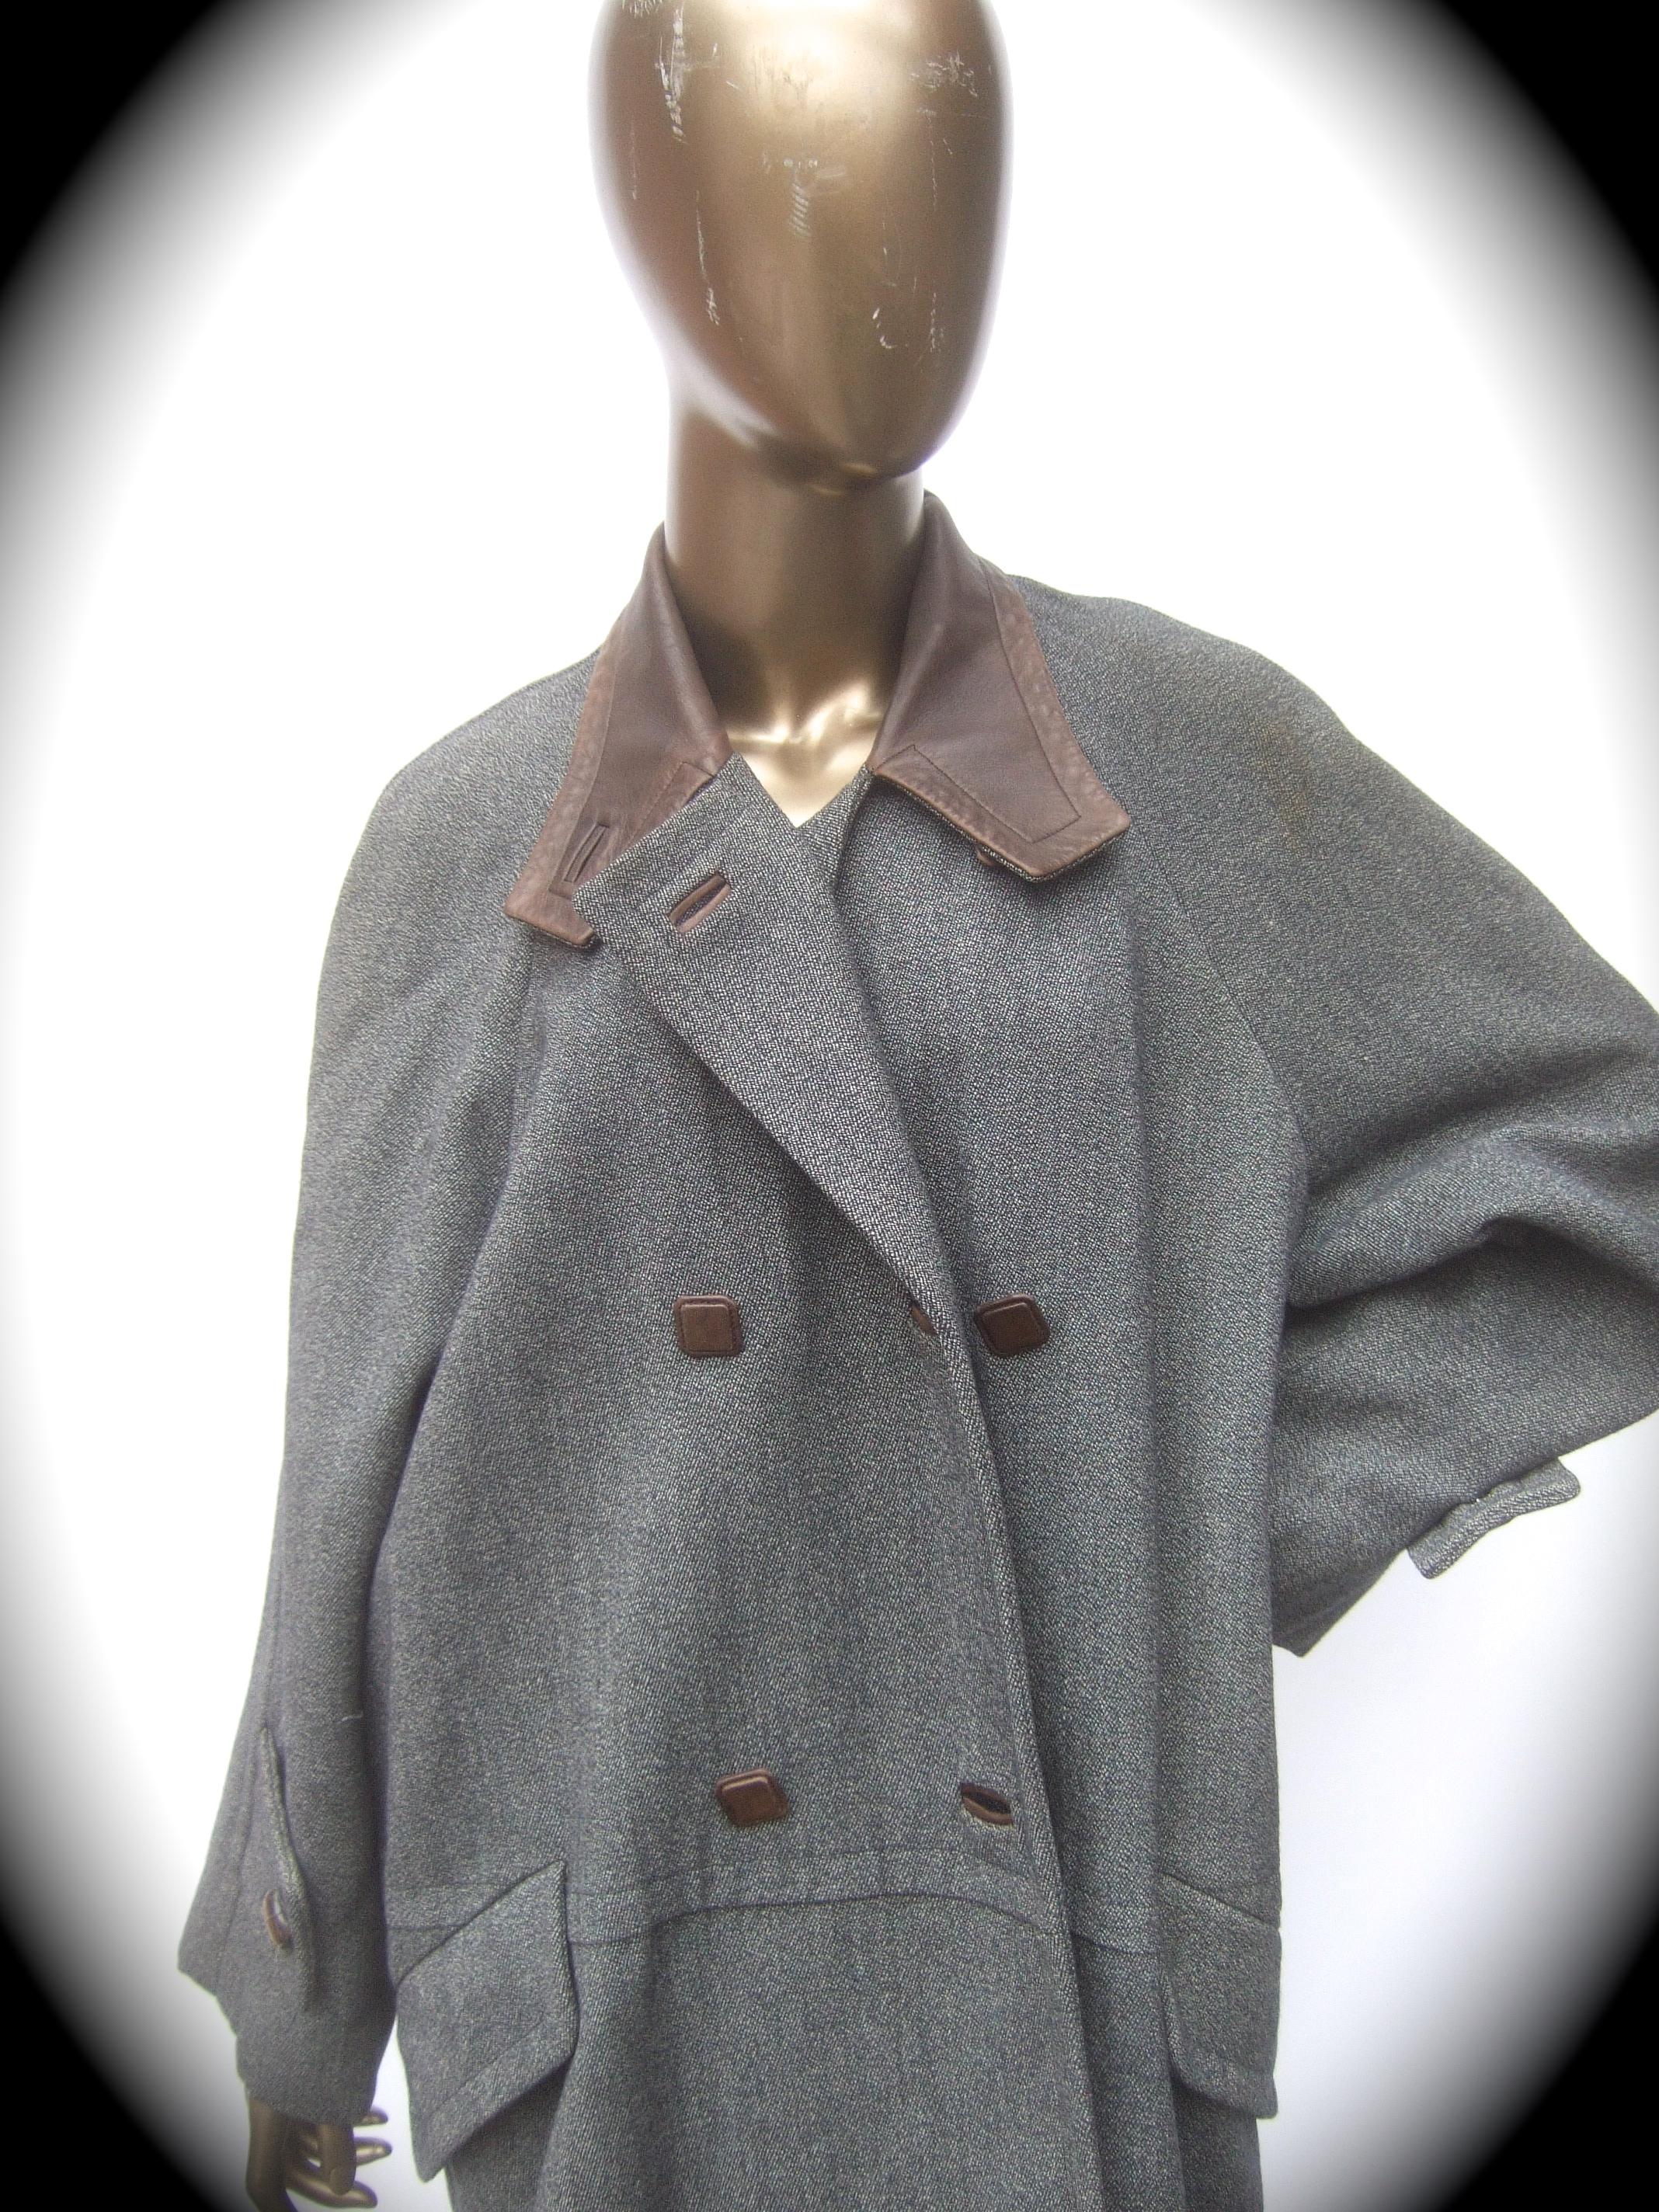 Hermes Paris Gray Heavy Gauge Wool Leather Trim Unisex Coat c 1970s  In Good Condition For Sale In University City, MO